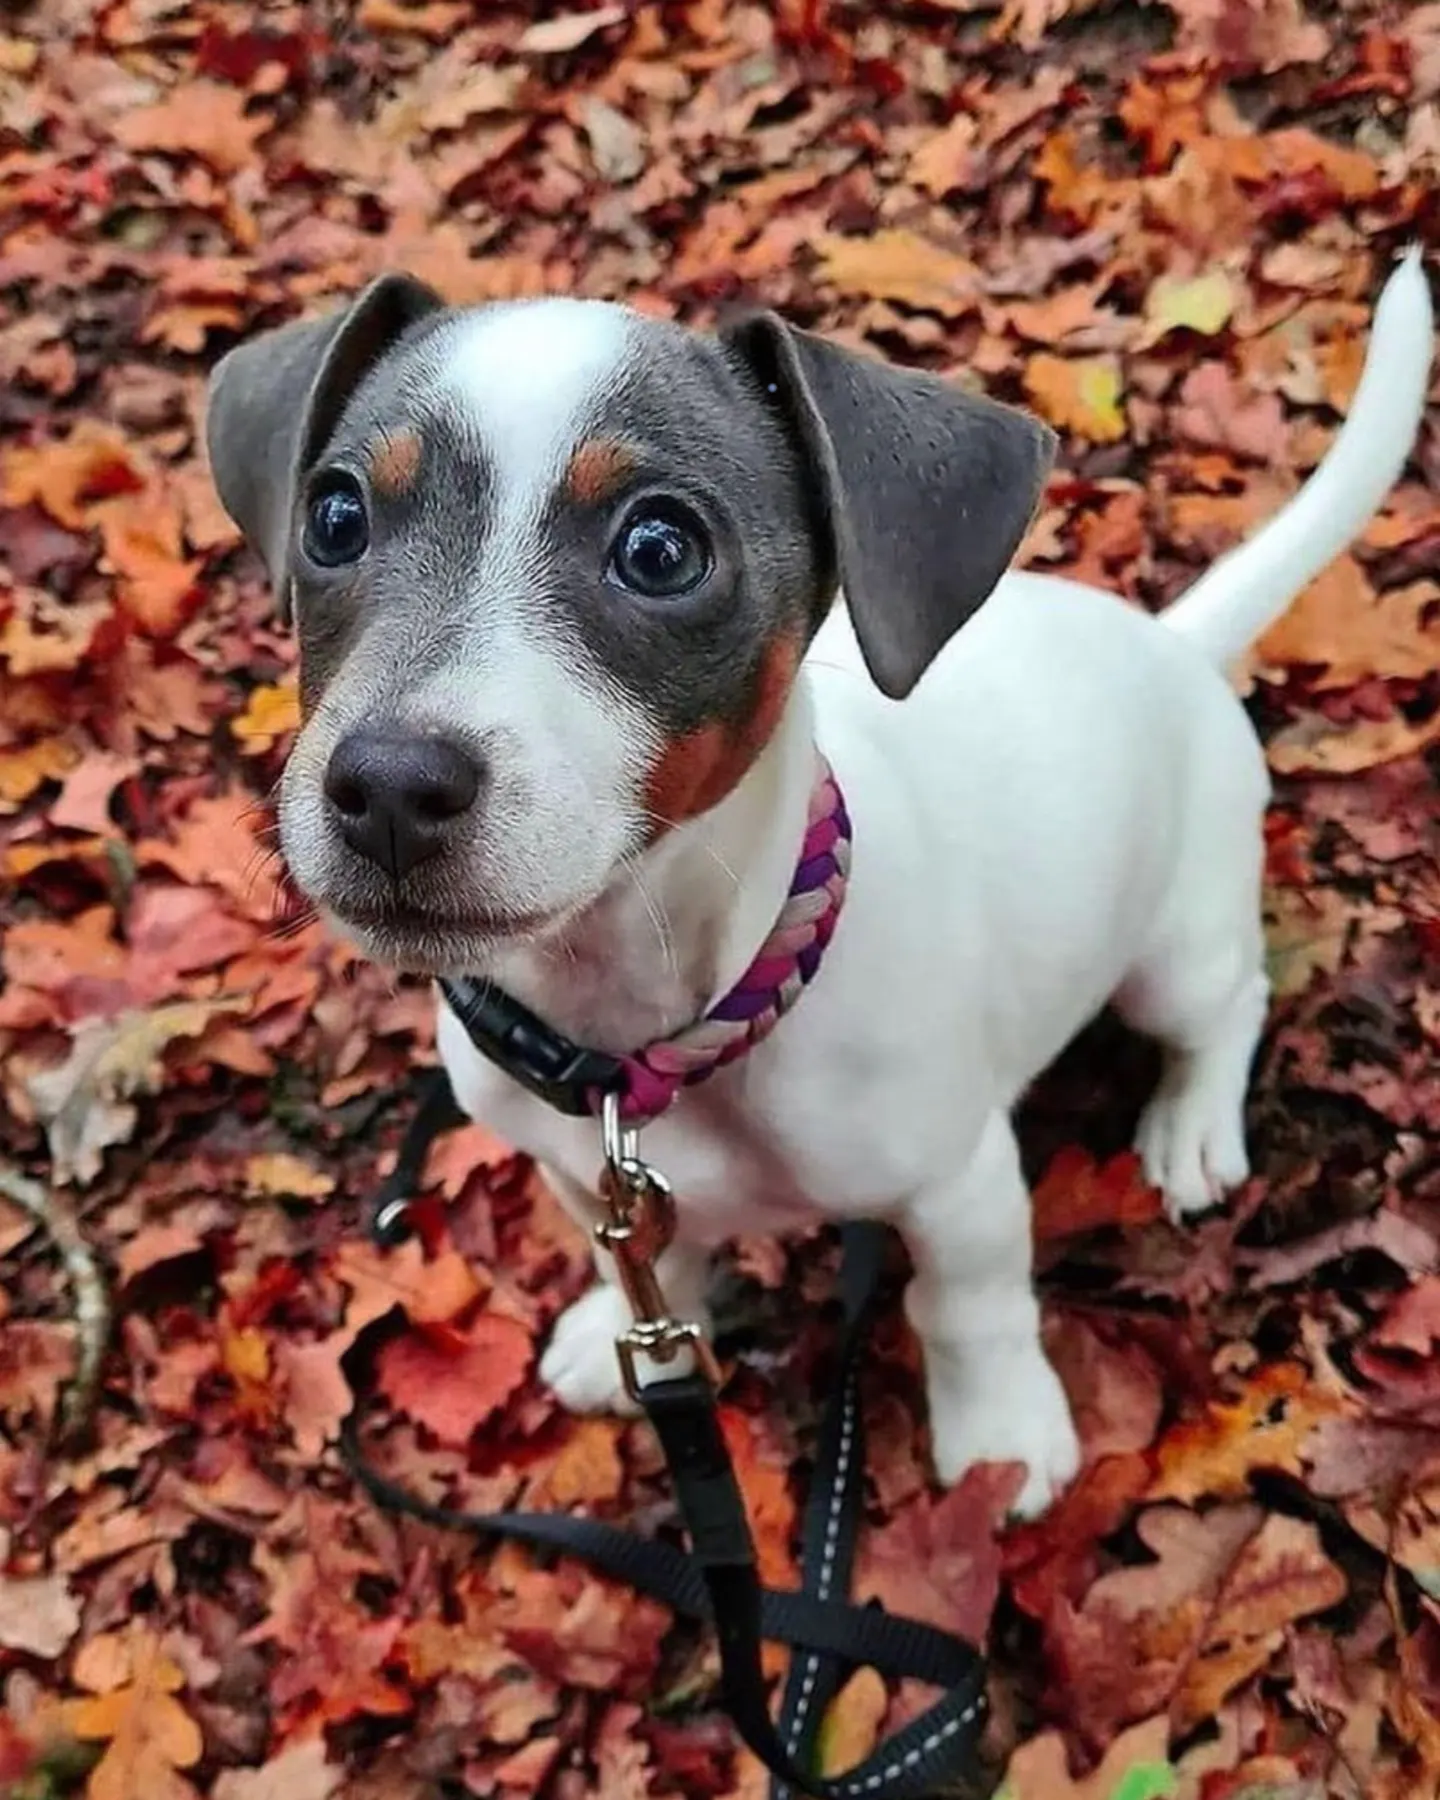 An adorable dog with big eyes standing on leaves